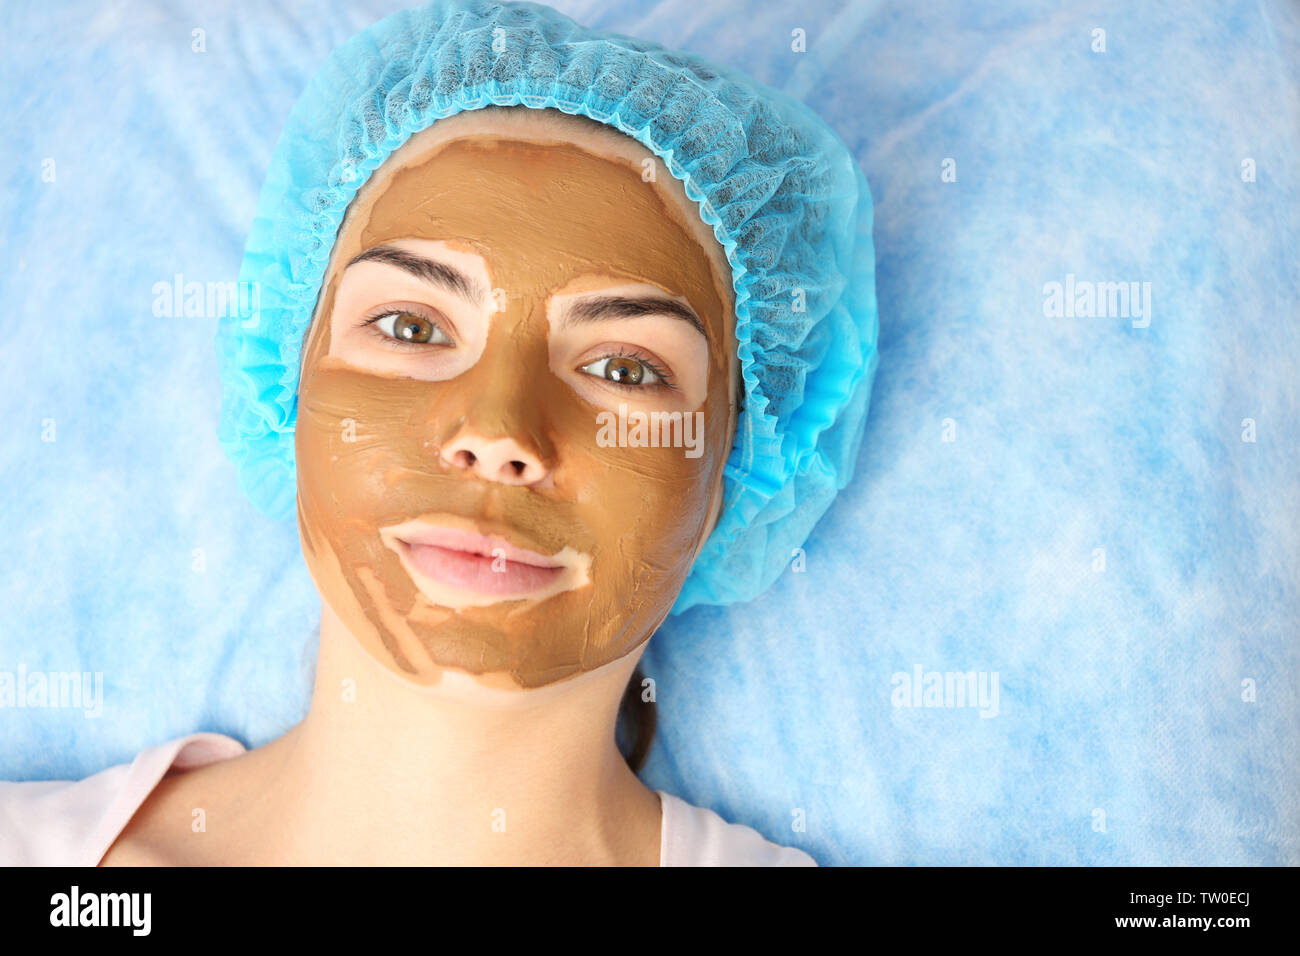 Young woman having beauty treatments in salon Stock Photo